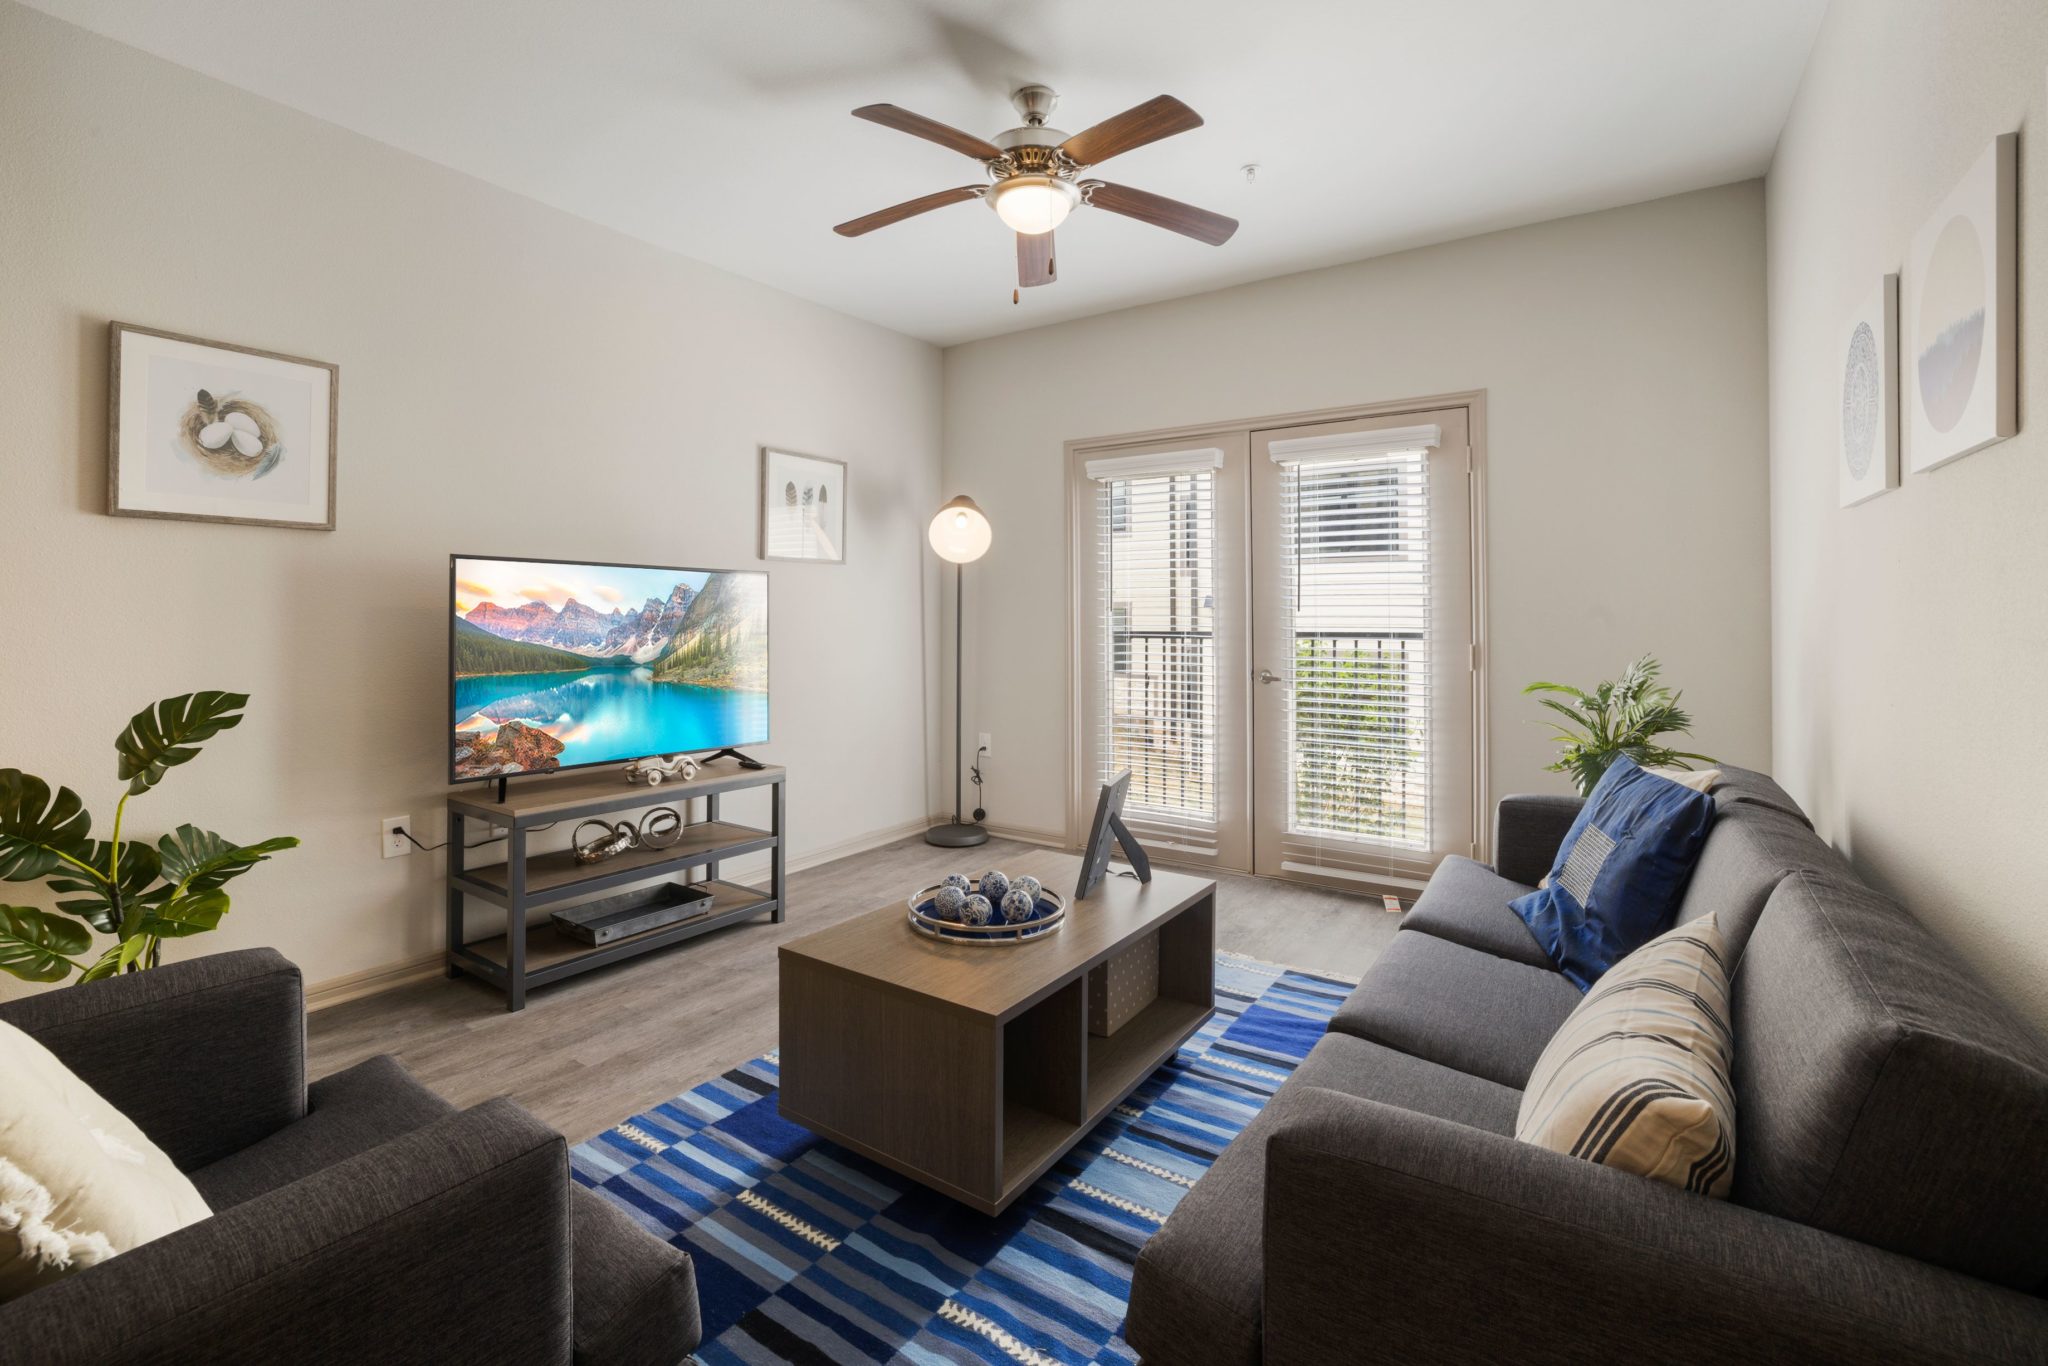 Best Living Room Tv For Apartment